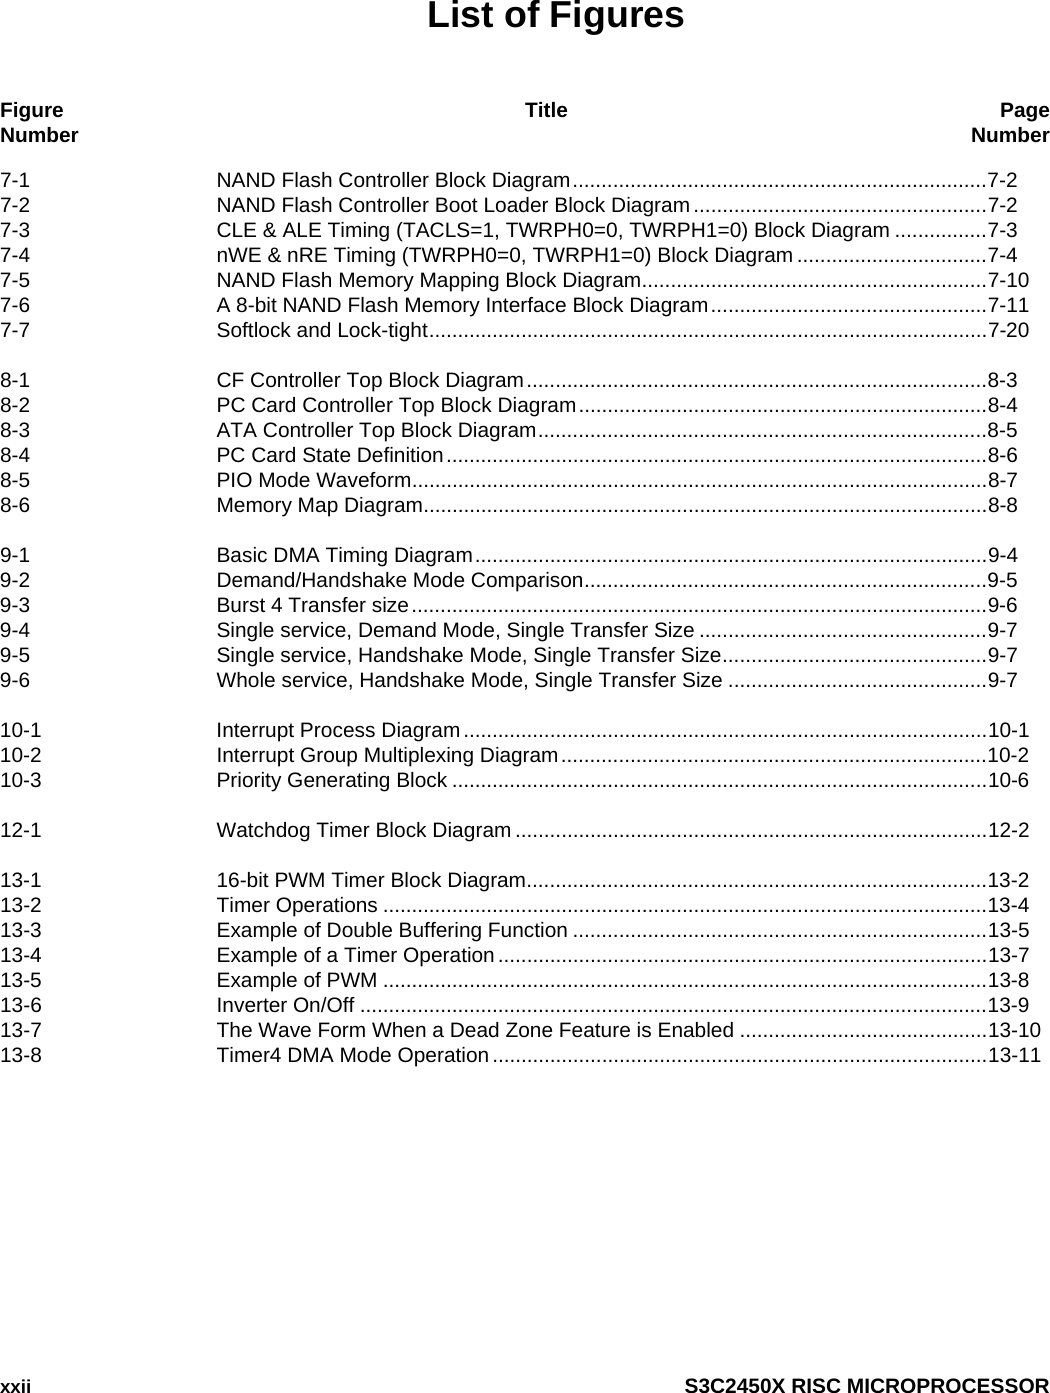  xxii  S3C2450X RISC MICROPROCESSOR List of Figures Figure Title Page Number  Number 7-1   NAND Flash Controller Block Diagram........................................................................7-2 7-2   NAND Flash Controller Boot Loader Block Diagram ...................................................7-2 7-3   CLE &amp; ALE Timing (TACLS=1, TWRPH0=0, TWRPH1=0) Block Diagram ................7-3 7-4   nWE &amp; nRE Timing (TWRPH0=0, TWRPH1=0) Block Diagram .................................7-4 7-5   NAND Flash Memory Mapping Block Diagram............................................................7-10 7-6   A 8-bit NAND Flash Memory Interface Block Diagram................................................7-11 7-7   Softlock and Lock-tight.................................................................................................7-20  8-1   CF Controller Top Block Diagram................................................................................8-3 8-2   PC Card Controller Top Block Diagram.......................................................................8-4 8-3   ATA Controller Top Block Diagram..............................................................................8-5 8-4   PC Card State Definition..............................................................................................8-6 8-5   PIO Mode Waveform....................................................................................................8-7 8-6   Memory Map Diagram..................................................................................................8-8  9-1   Basic DMA Timing Diagram.........................................................................................9-4 9-2   Demand/Handshake Mode Comparison......................................................................9-5 9-3   Burst 4 Transfer size....................................................................................................9-6 9-4   Single service, Demand Mode, Single Transfer Size ..................................................9-7 9-5   Single service, Handshake Mode, Single Transfer Size..............................................9-7 9-6   Whole service, Handshake Mode, Single Transfer Size .............................................9-7  10-1   Interrupt Process Diagram ...........................................................................................10-1 10-2   Interrupt Group Multiplexing Diagram..........................................................................10-2 10-3   Priority Generating Block .............................................................................................10-6  12-1  Watchdog Timer Block Diagram ..................................................................................12-2  13-1   16-bit PWM Timer Block Diagram................................................................................13-2 13-2   Timer Operations .........................................................................................................13-4 13-3   Example of Double Buffering Function ........................................................................13-5 13-4  Example of a Timer Operation .....................................................................................13-7 13-5   Example of PWM .........................................................................................................13-8 13-6   Inverter On/Off .............................................................................................................13-9 13-7   The Wave Form When a Dead Zone Feature is Enabled ...........................................13-10 13-8   Timer4 DMA Mode Operation ......................................................................................13-11    